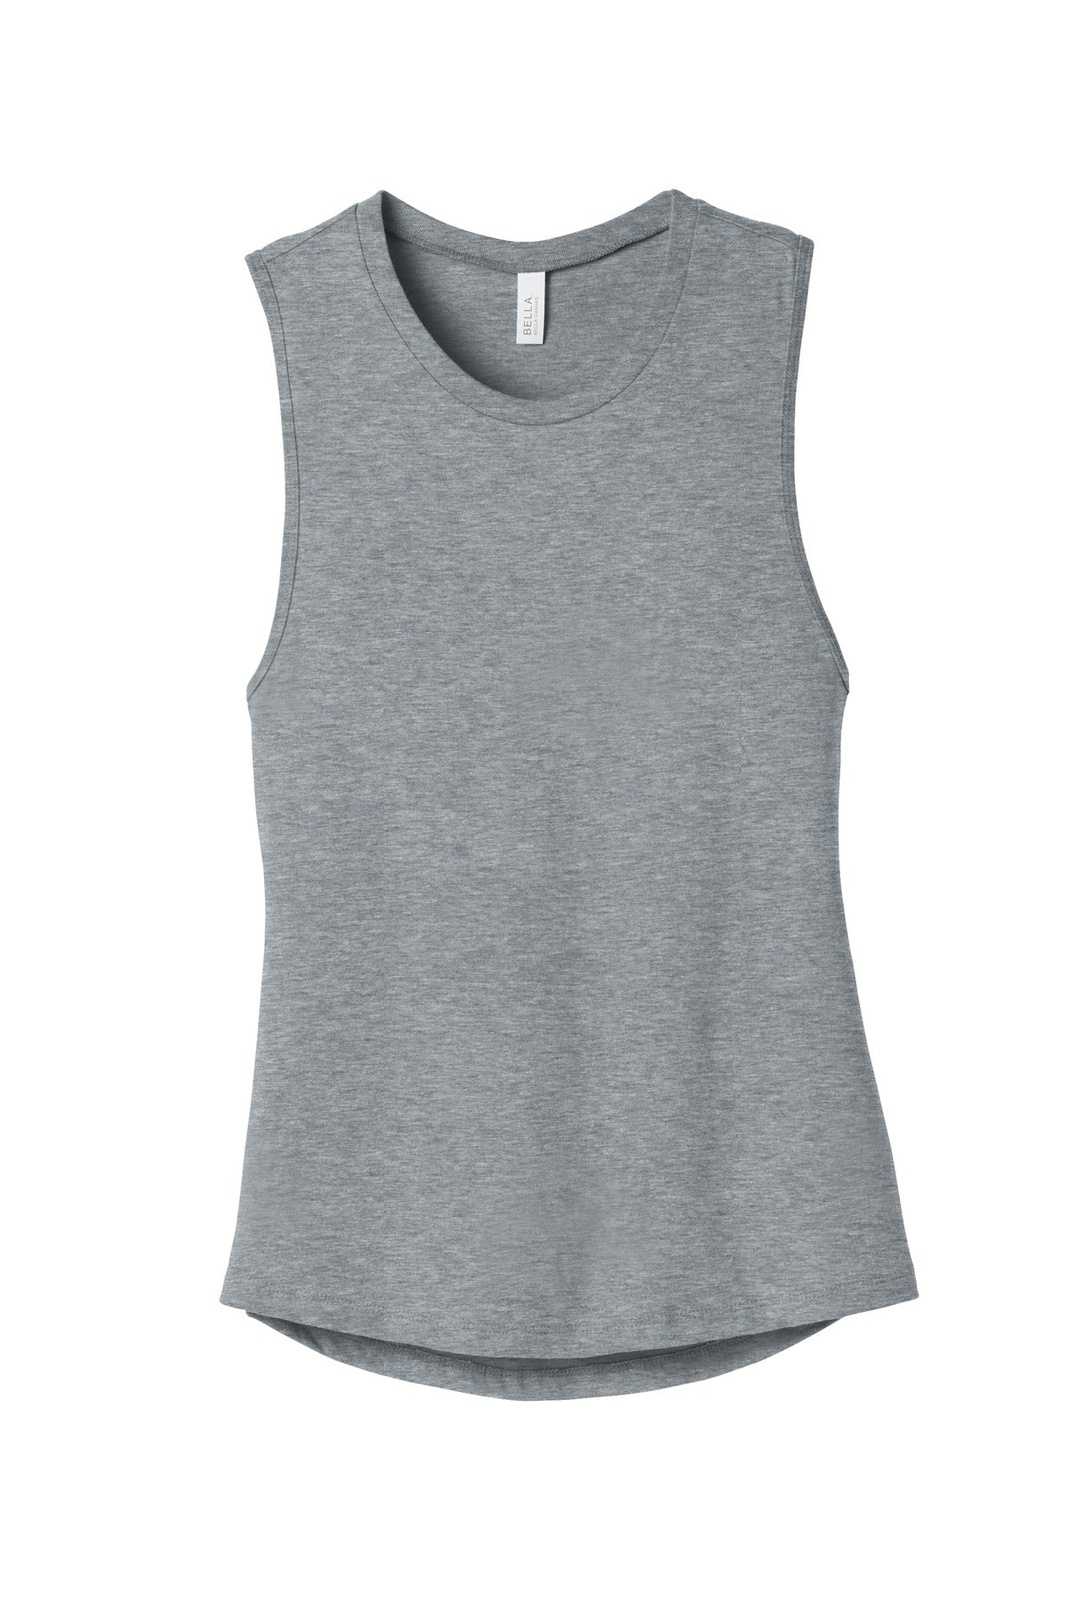 Bella + Canvas 6003 Women's Jersey Muscle Tank - Athletic Heather - HIT a Double